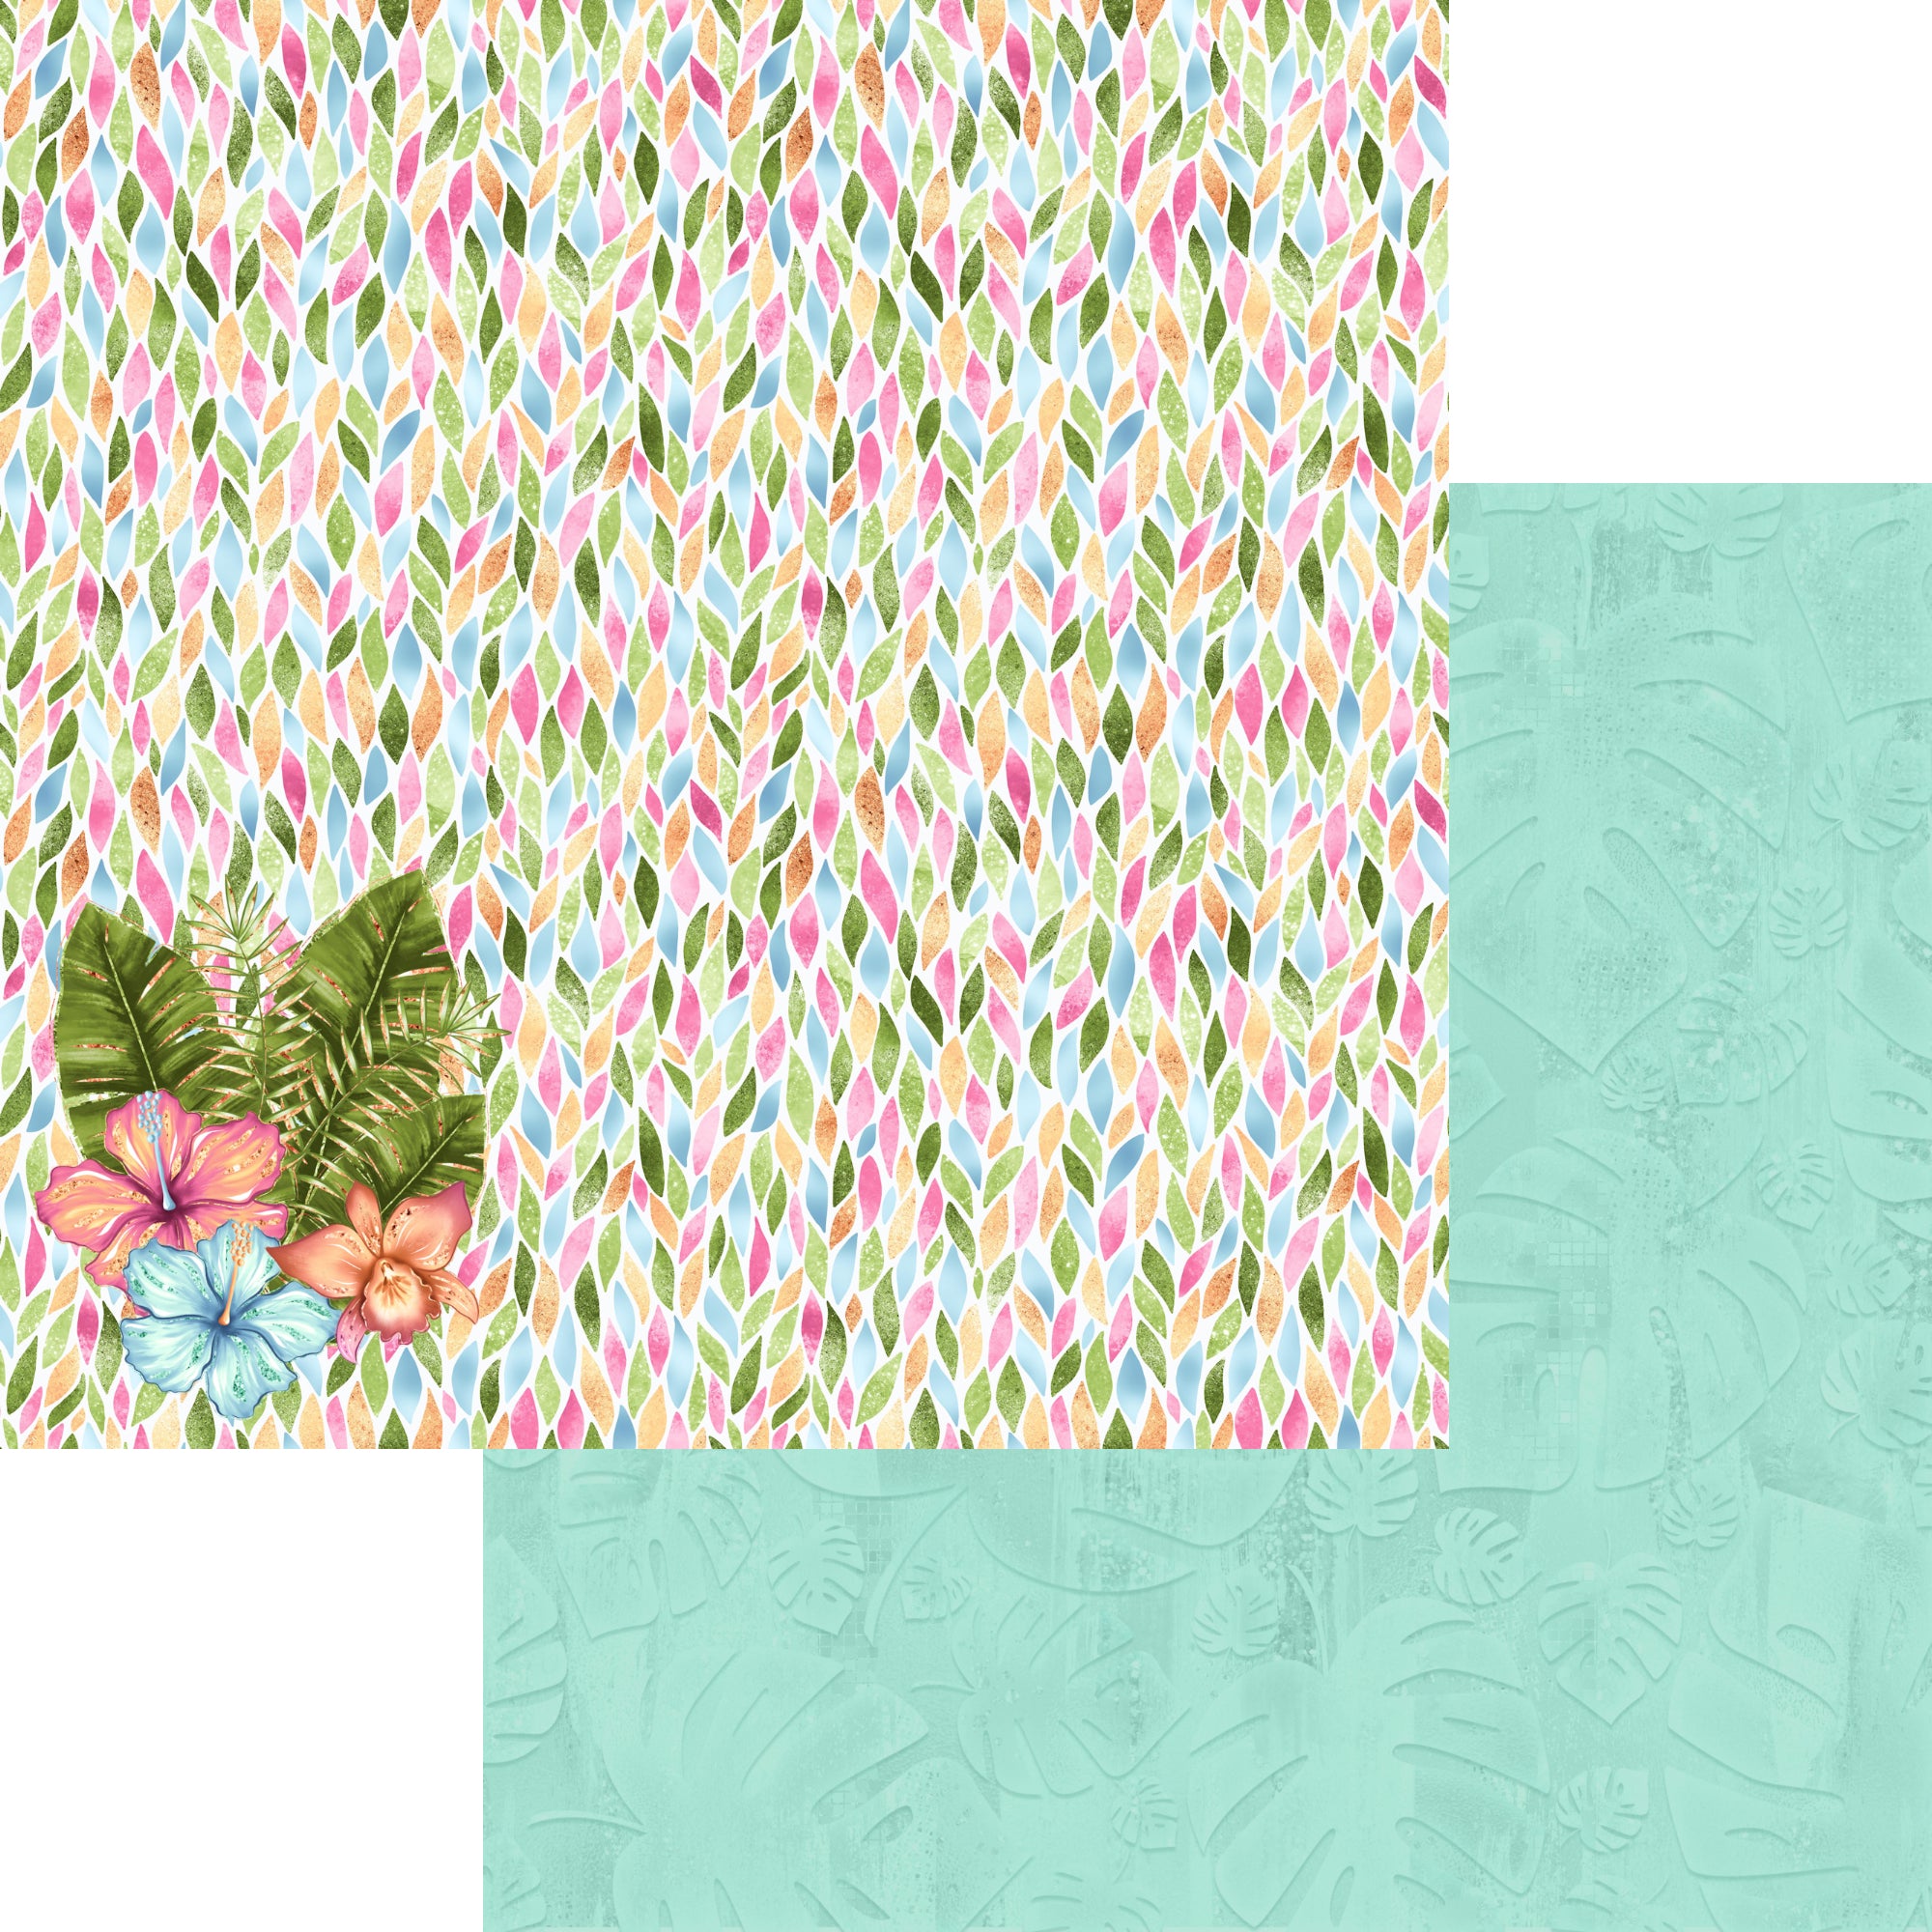 Tropical Bliss 12 x 12 Scrapbook Collection Kit by SSC Designs